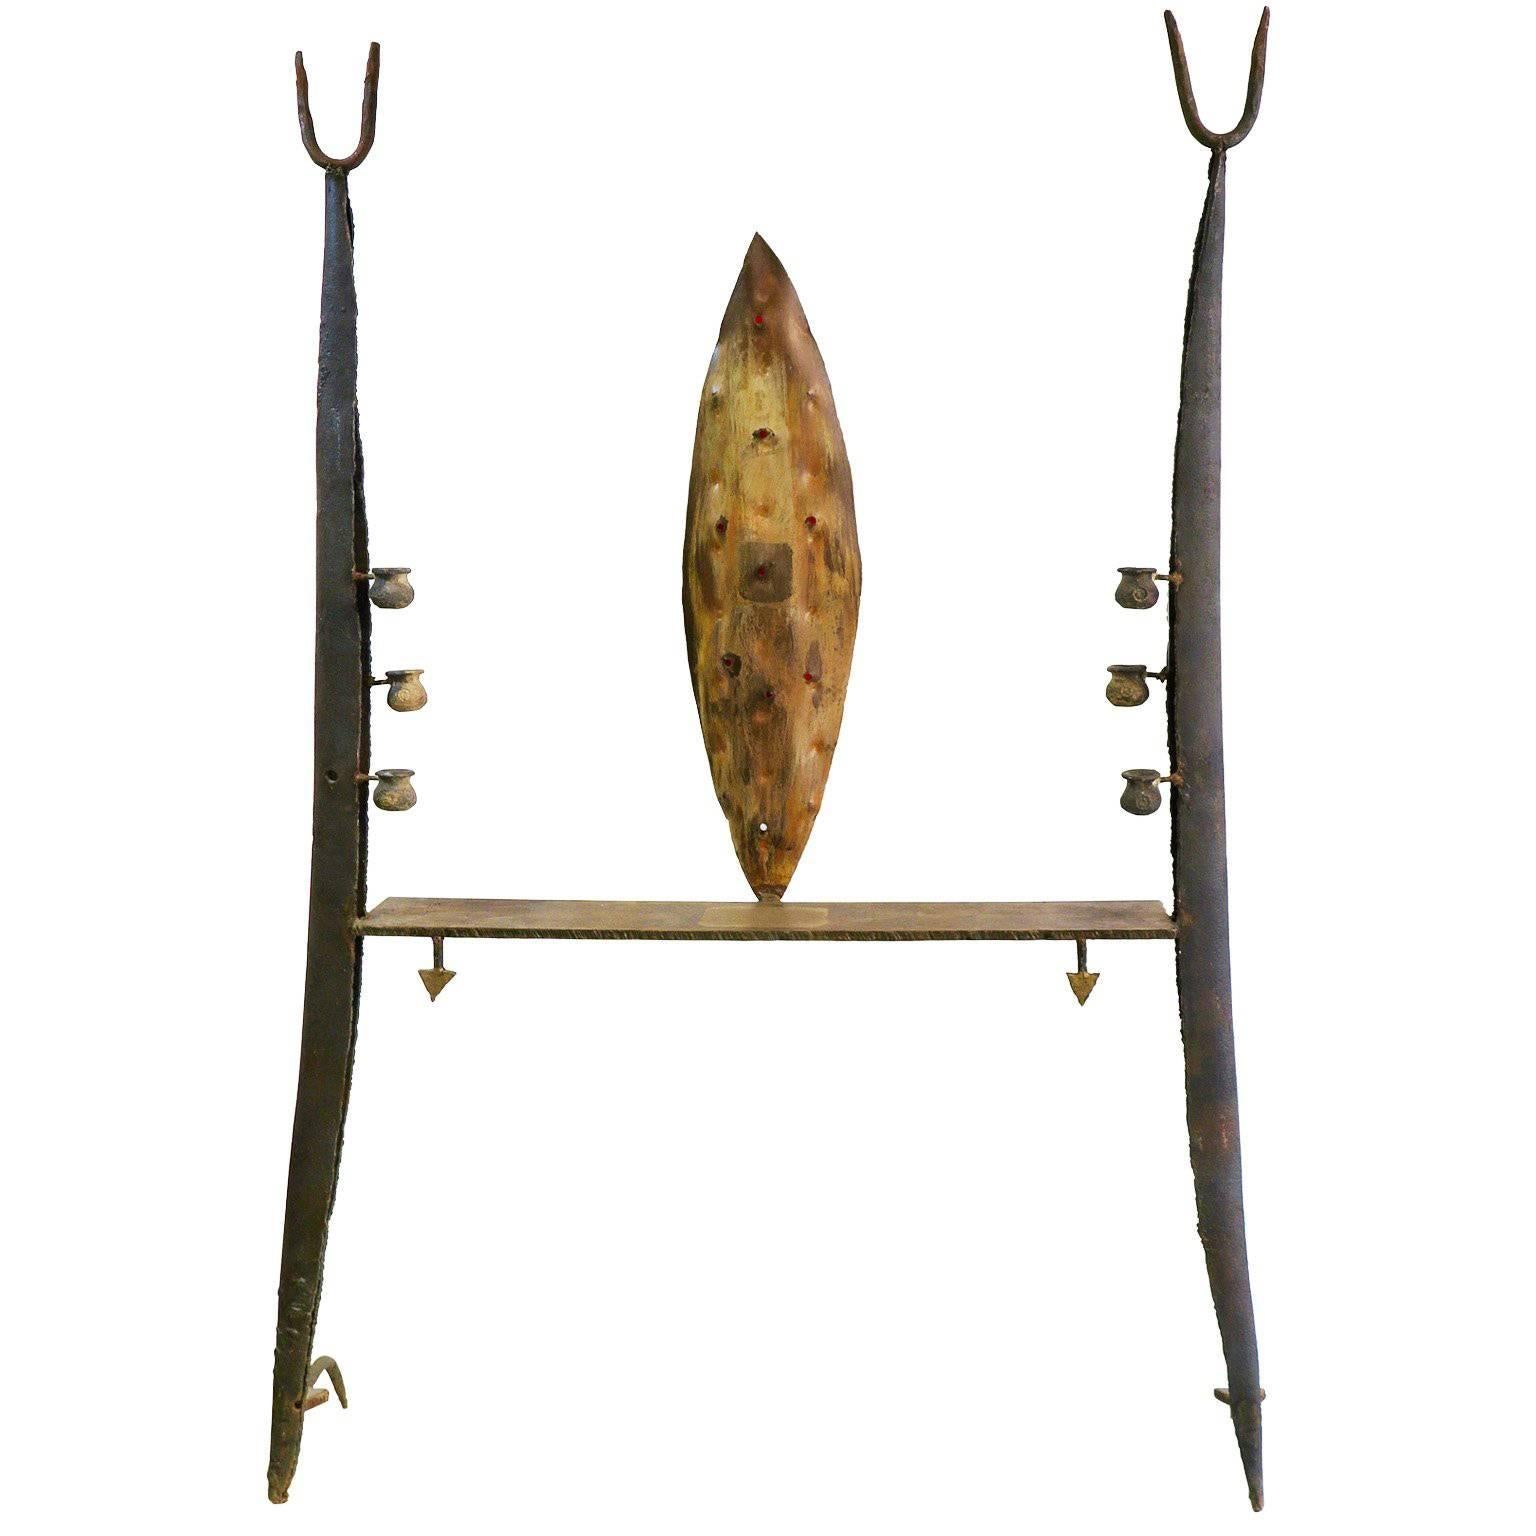 Unique Wall Console / Sculpture in Bronze and Iron by Jean-Jacques Argueyrolles